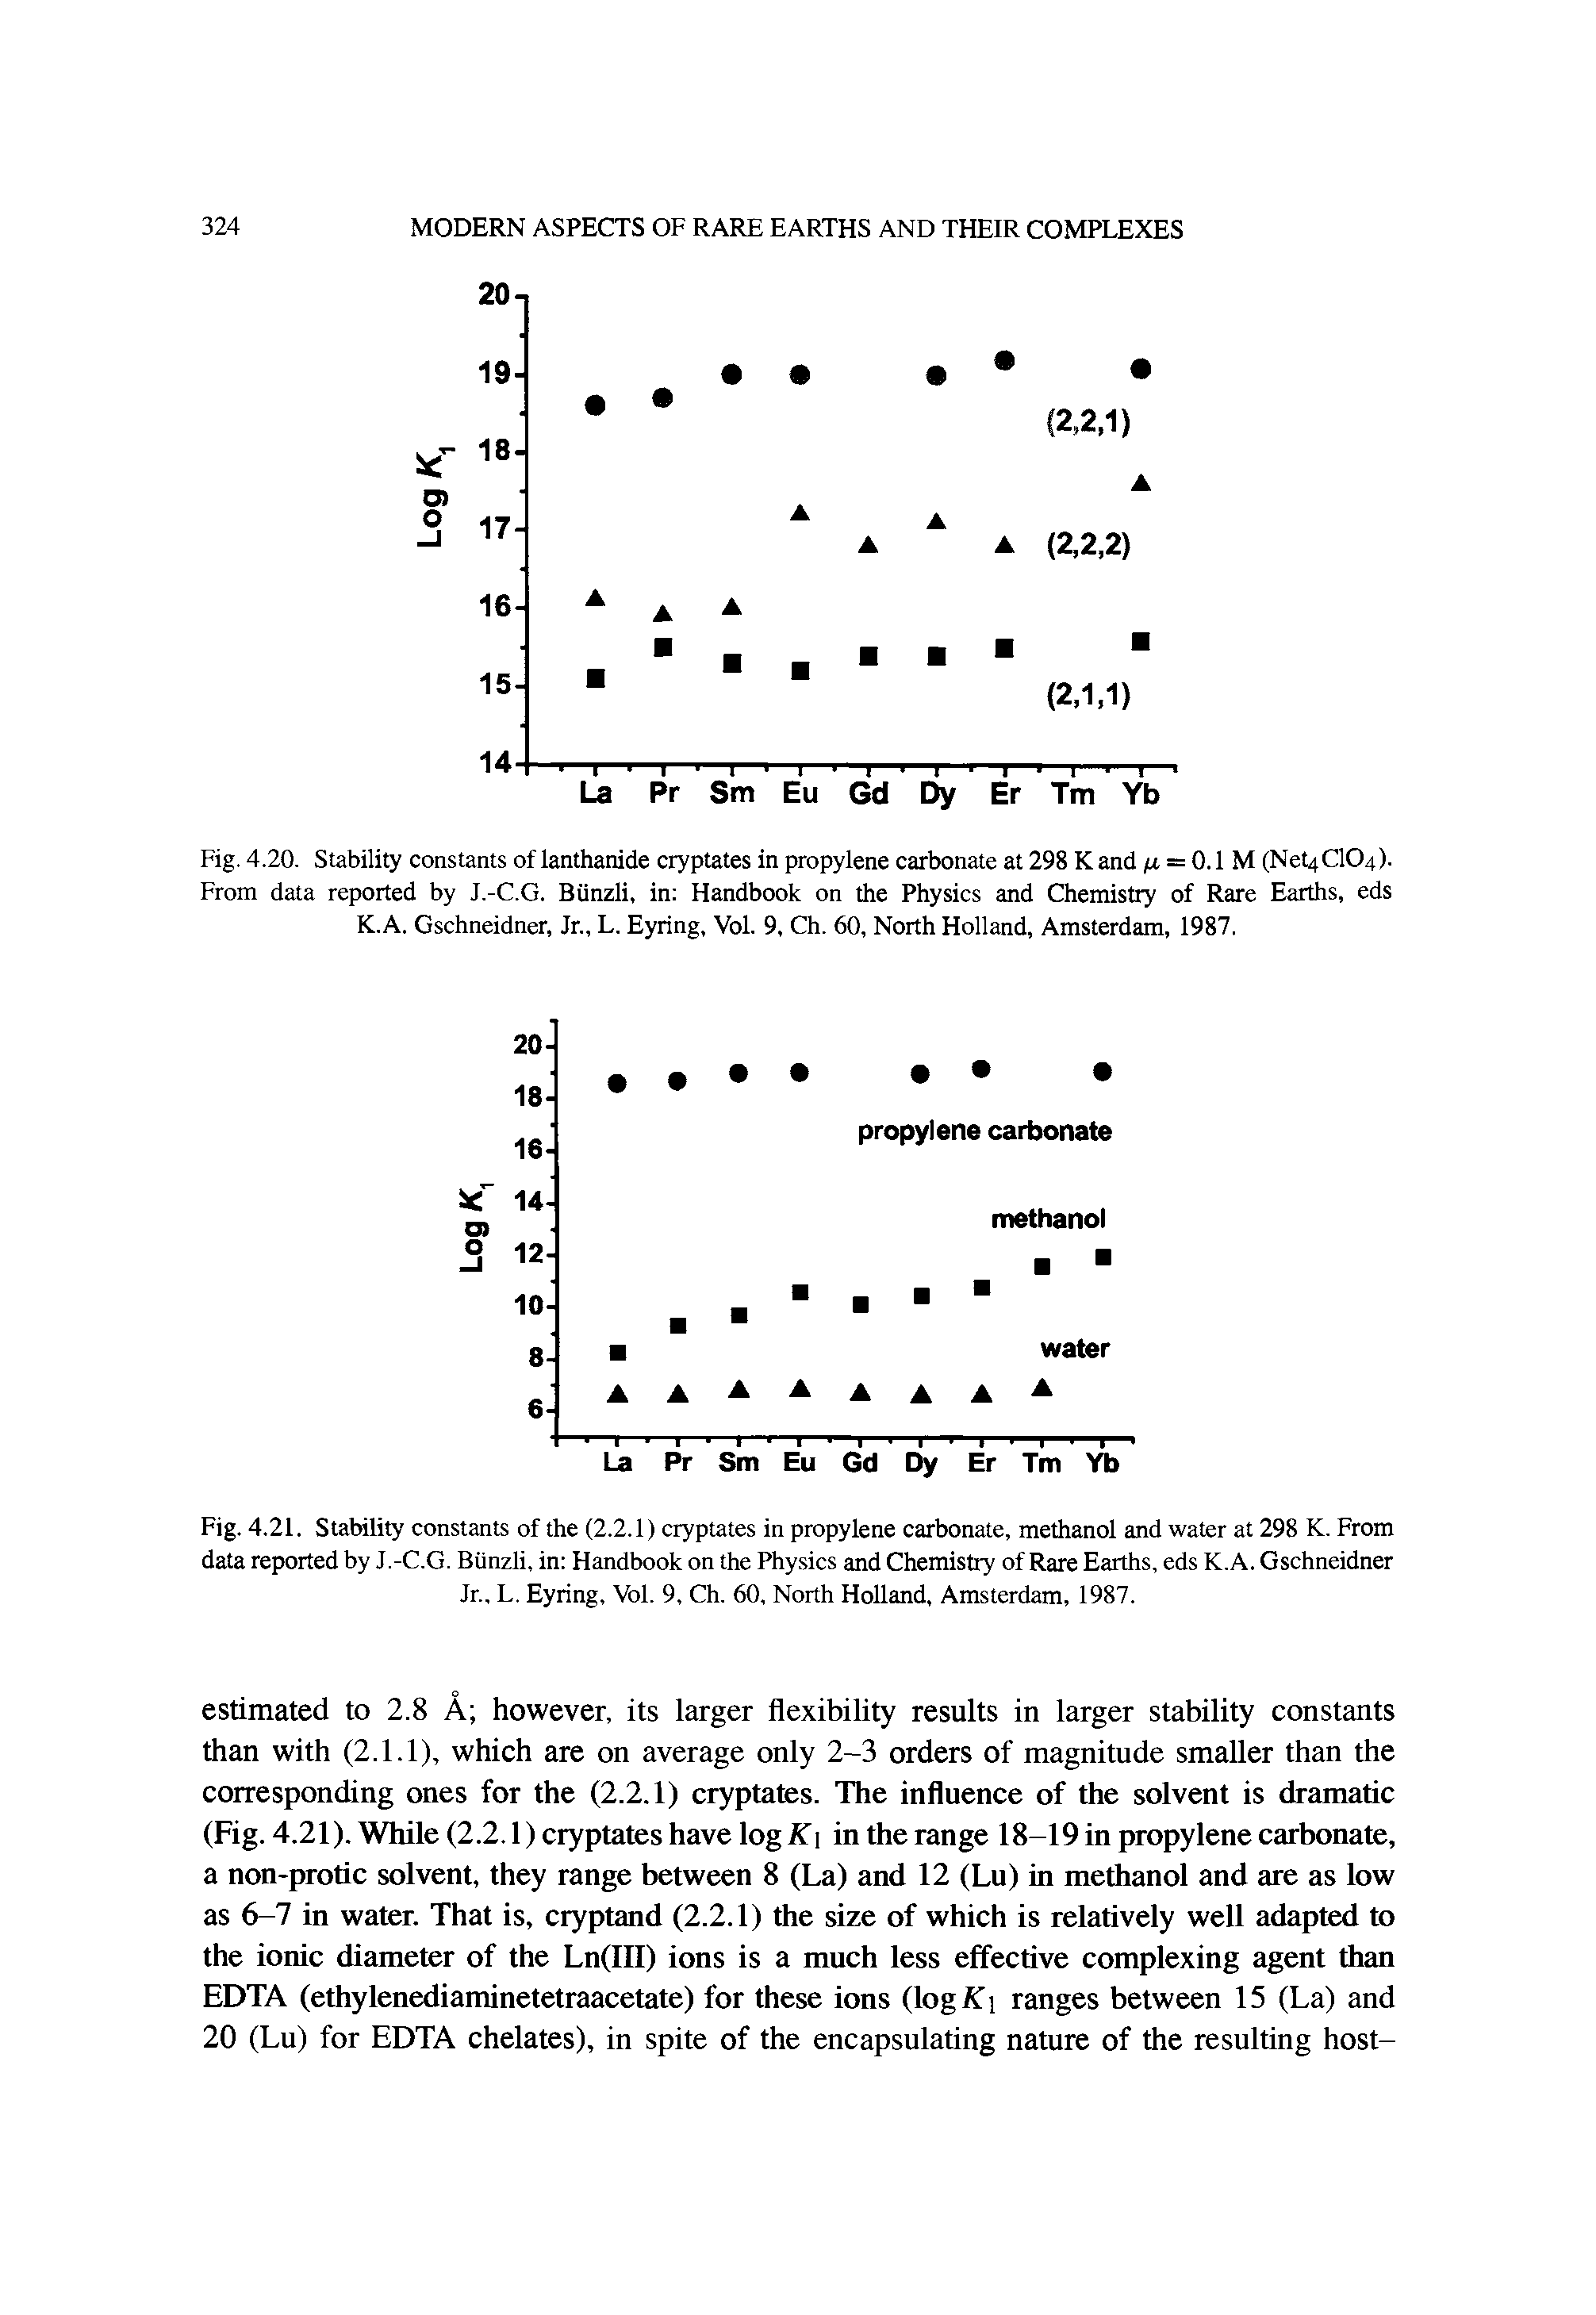 Fig. 4.20. Stability constants of lanthanide cryptates in propylene carbonate at 298 K and p. = 0.1 M (NettCKL). From data reported by J.-C.G. Biinzli, in Handbook on the Physics and Chemistry of Rare Earths, eds K.A. Gschneidner, Jr., L. Eyring, Vol. 9, Ch. 60, North Holland, Amsterdam, 1987.